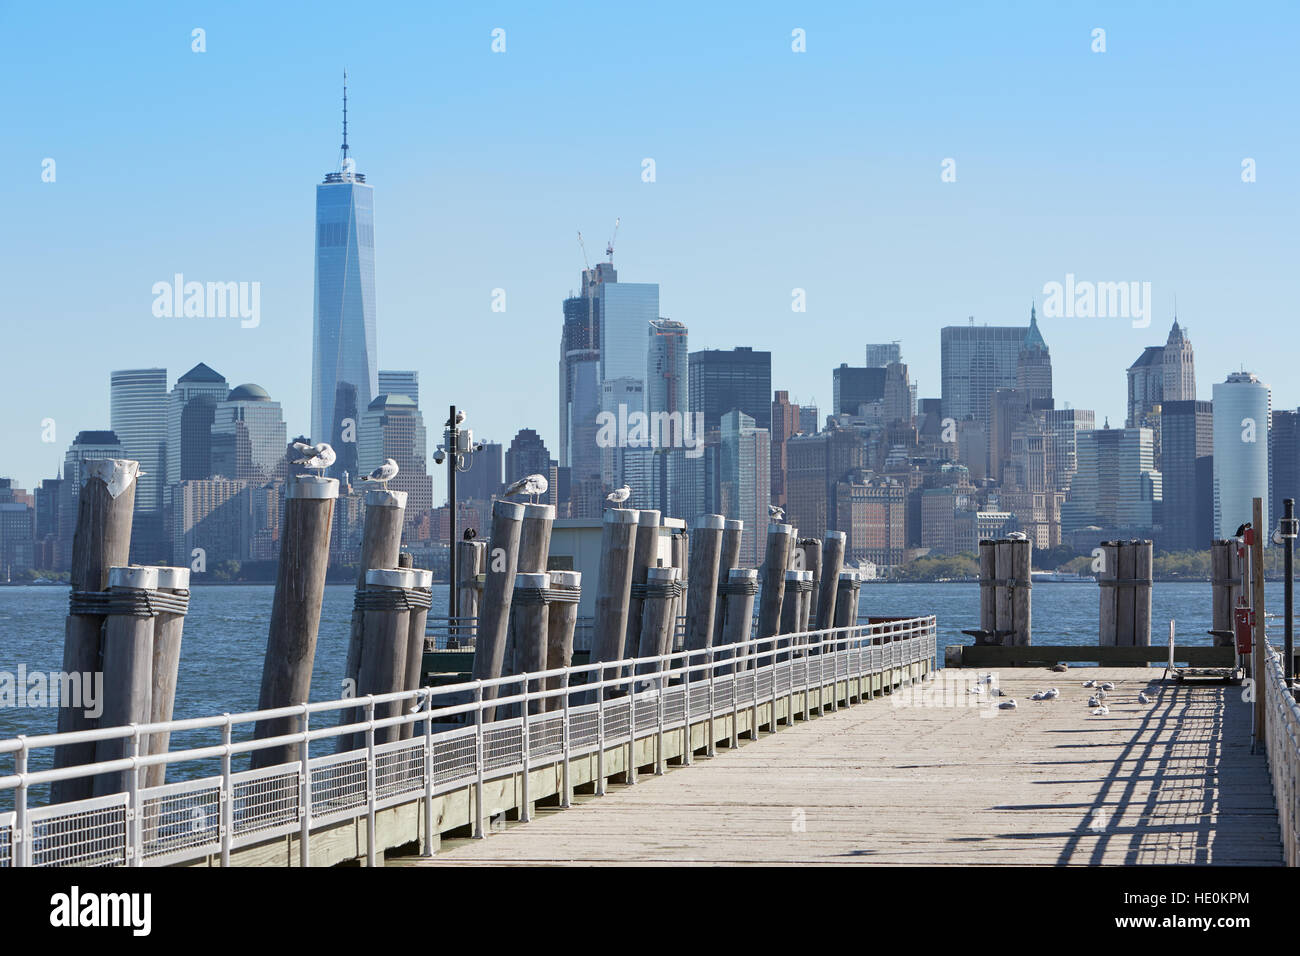 New York city skyline and pier with seagulls in a sunny day Stock Photo